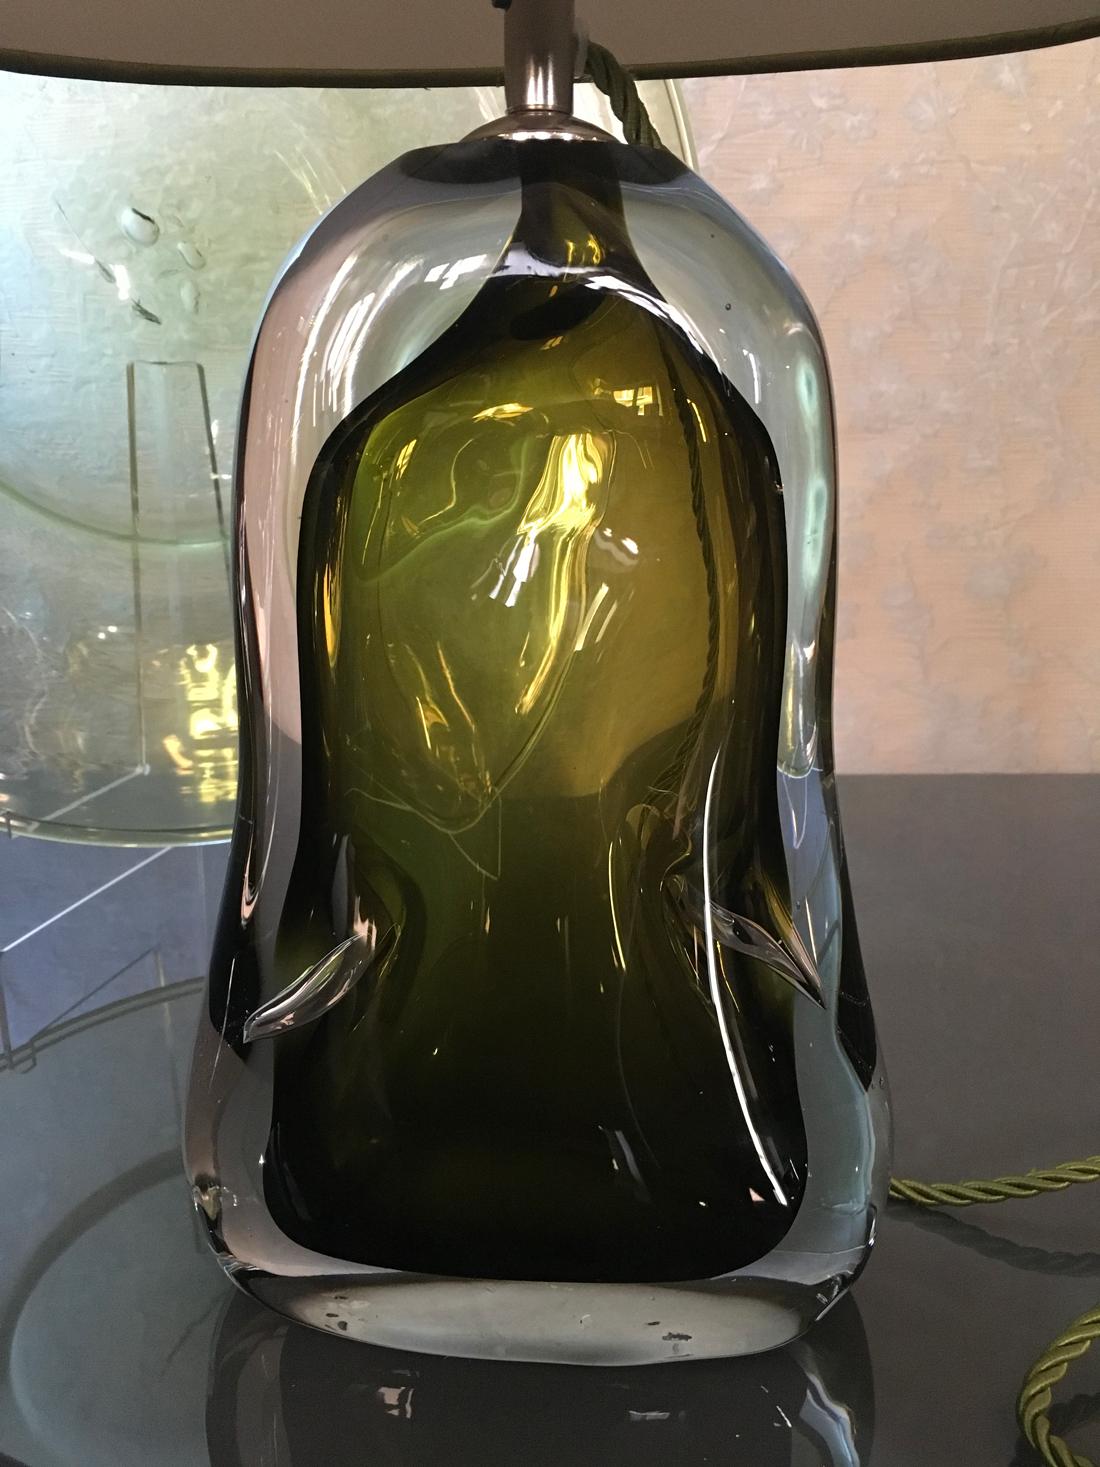 Contemporary green blown glass table lamp with paper black and white lamp shade is a beautiful eye catching object of art for the solide presence of the handcrafted glass.
Made by Porta Romana, United Kingdom
220-240 V max Wattage 40W
EU